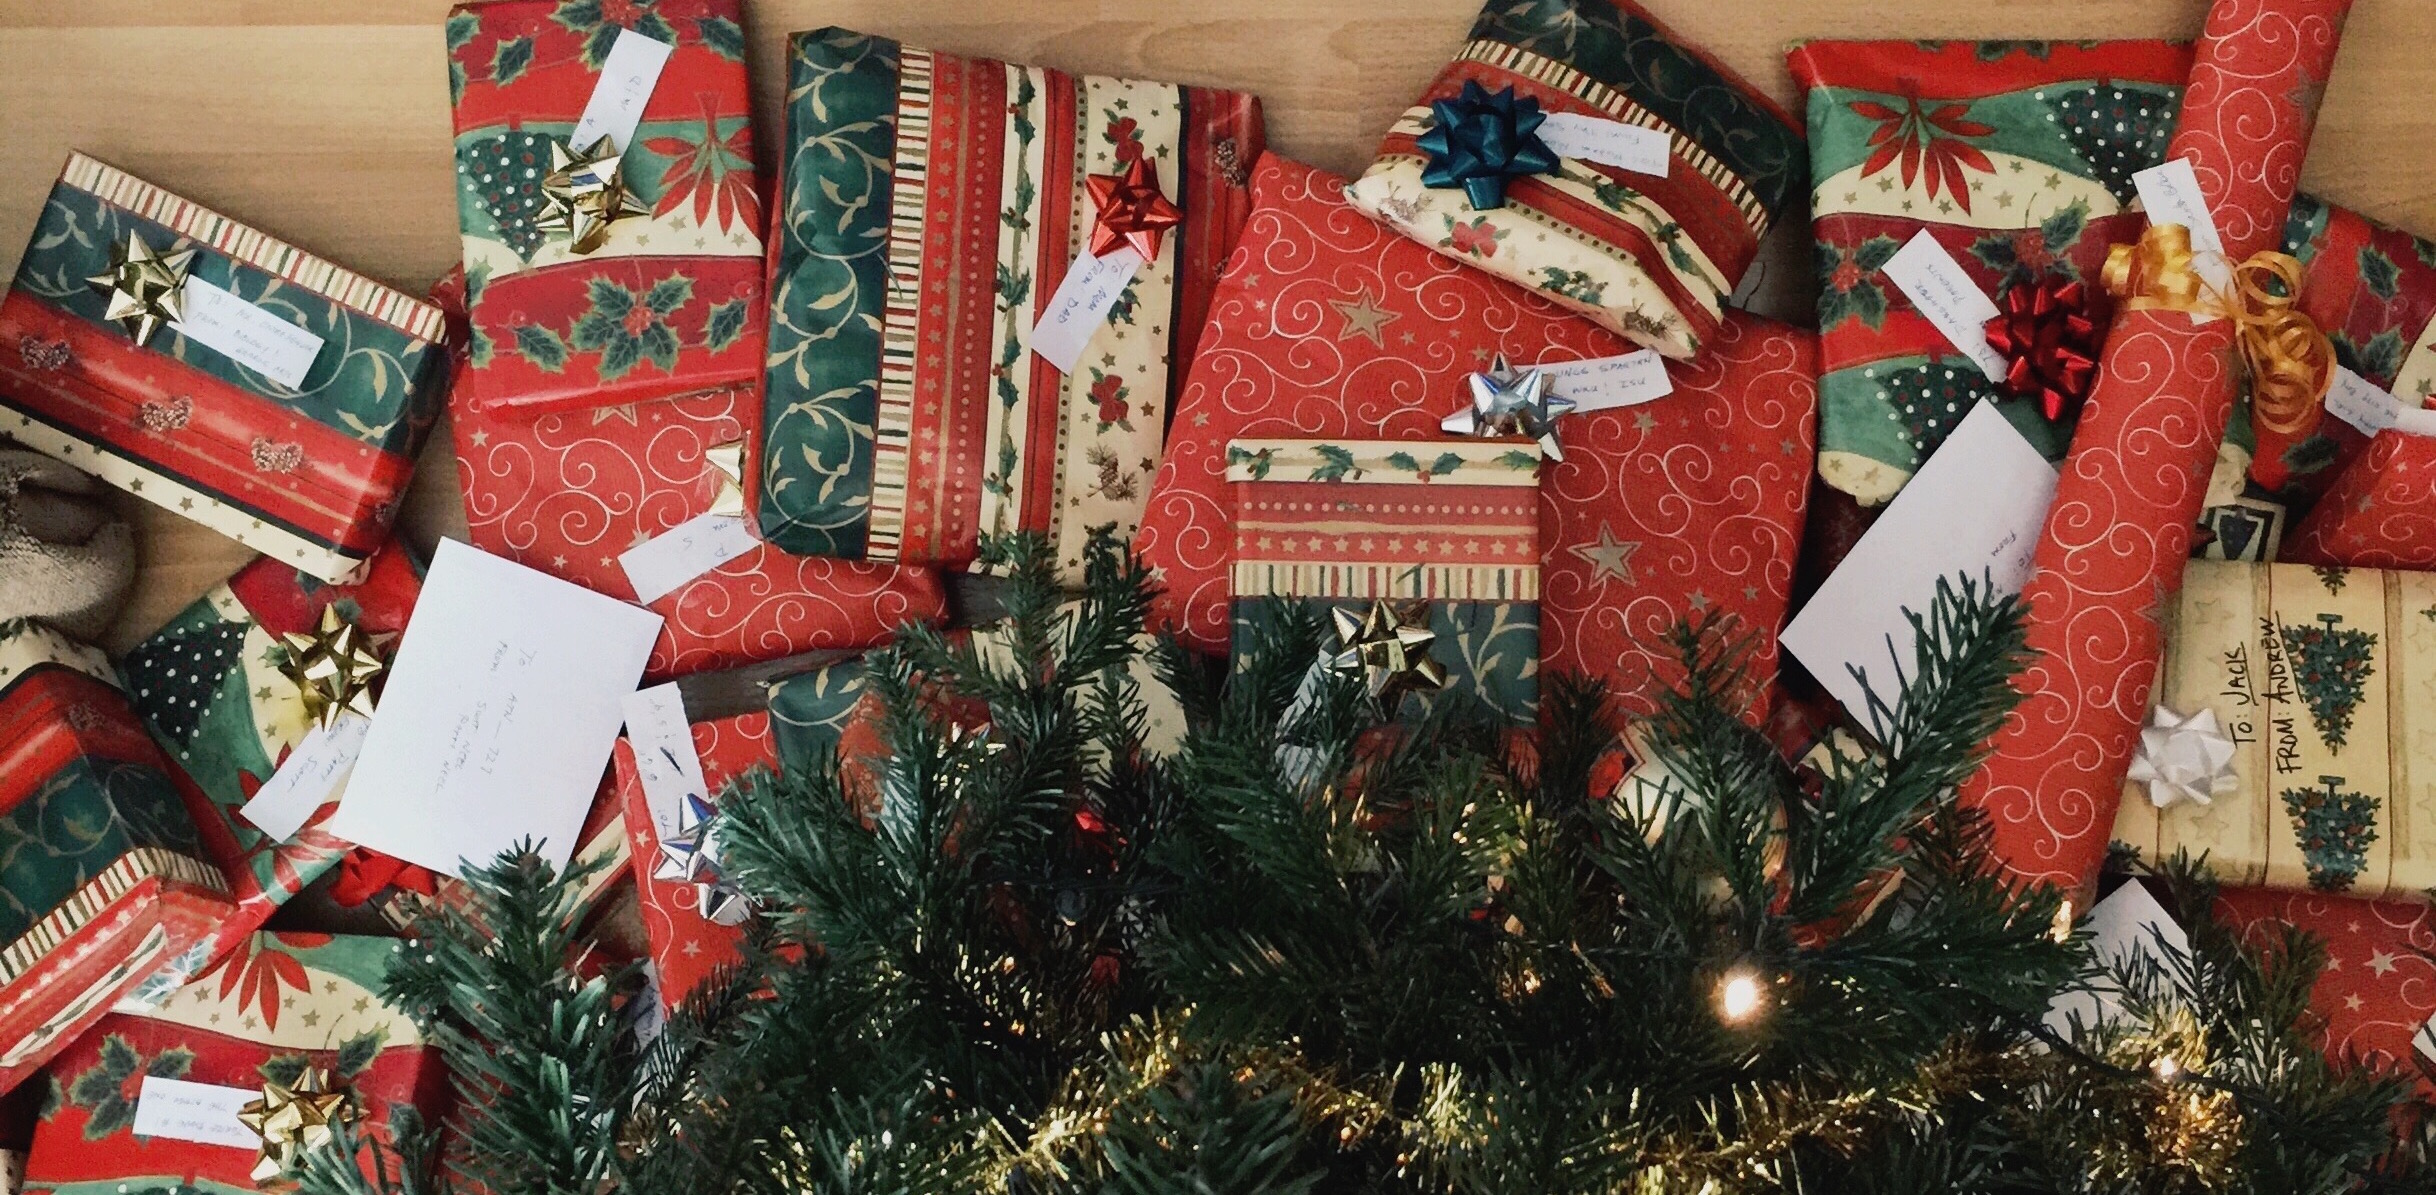 Photo of a pile of presents underneath a Christmas tree